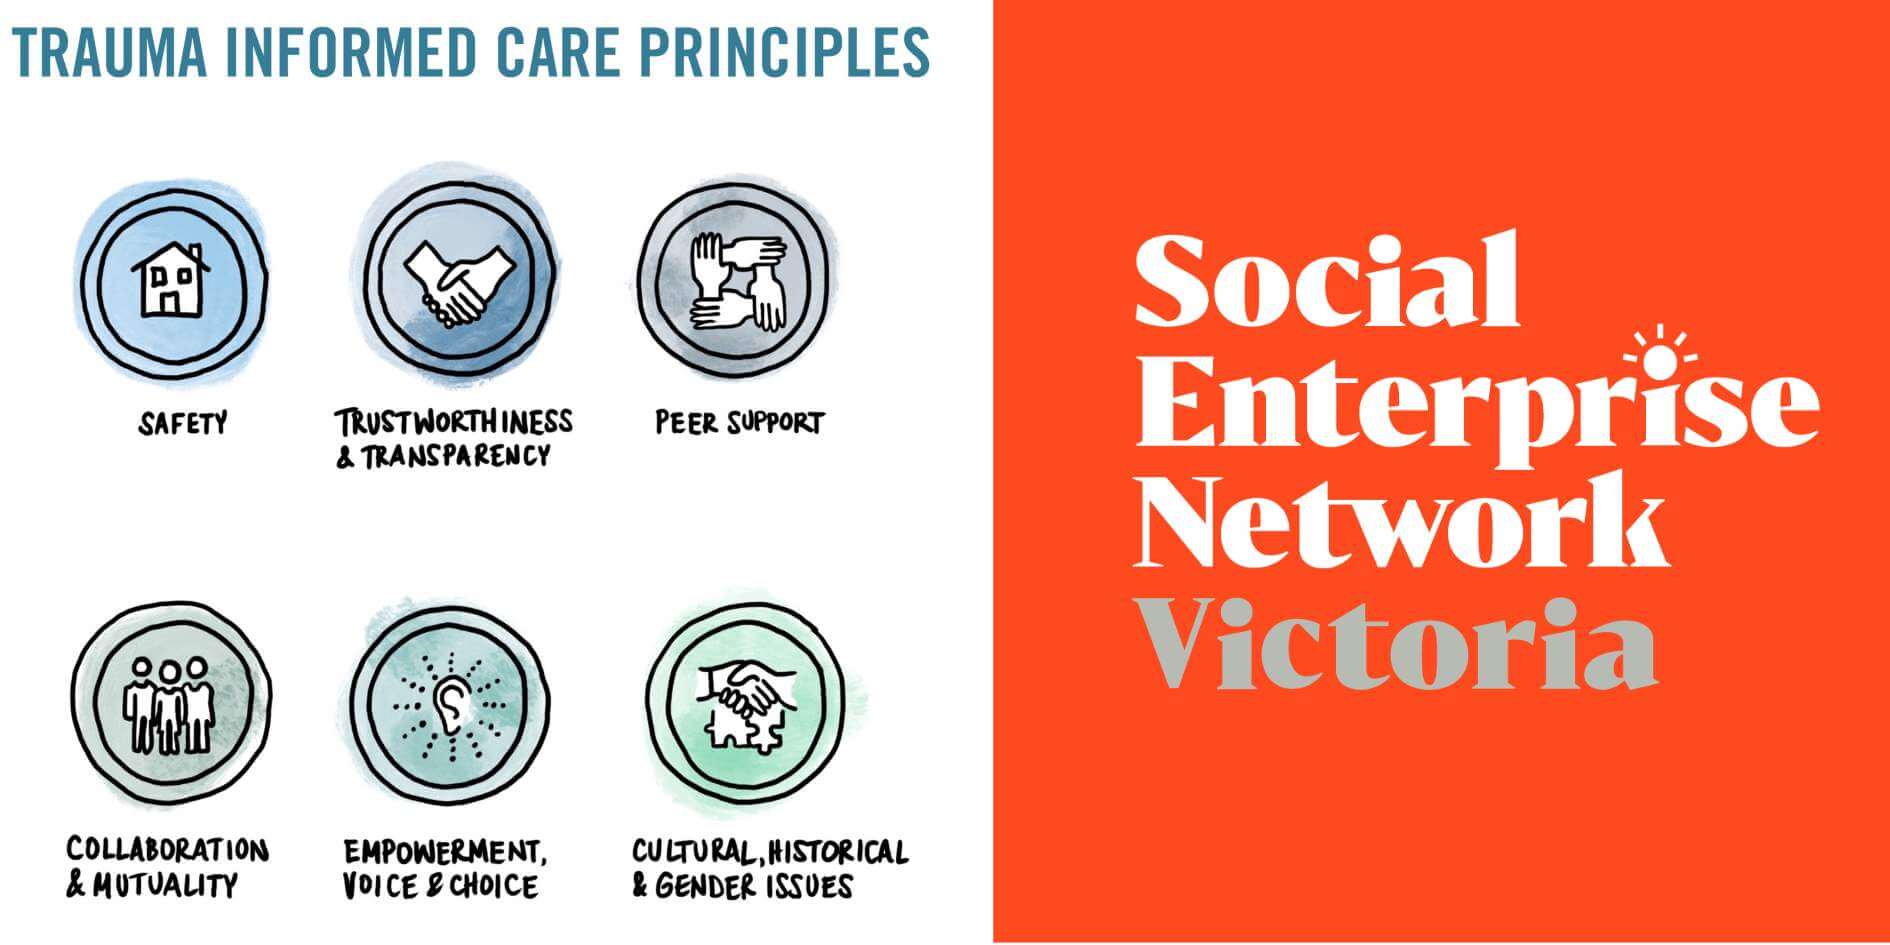 On the left of this banner are the words TRAUMA INFORMED CARE PRINCIPLES. Underneath these words are logos for SAFETY, TRUSTWORTHINESS & TRANSPARENCY, PEER SUPPORT, COLLABORATION AND MUTUALITY, EMPOWERMENT, VOICE & CHOICE, CULTURAL HISTORICAL GENDER ISSUES. On the right is the logo for SENVIC Social Enterprise Network Victoria.